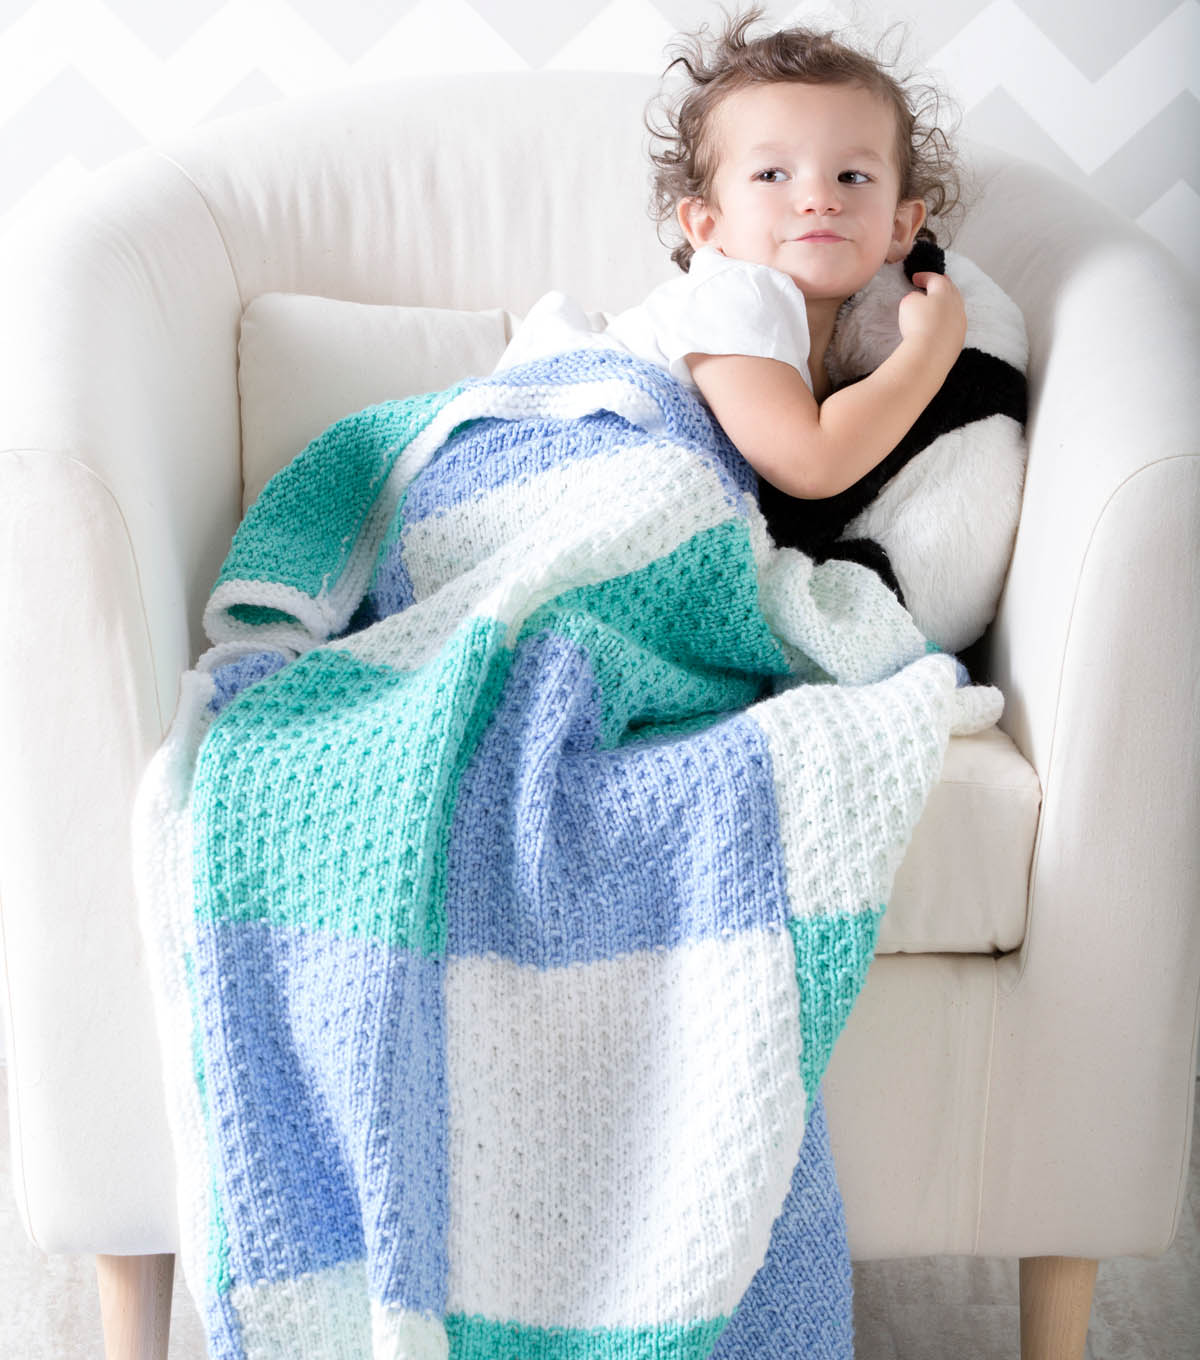 How To Make A Color Block Baby Blanket | JOANN